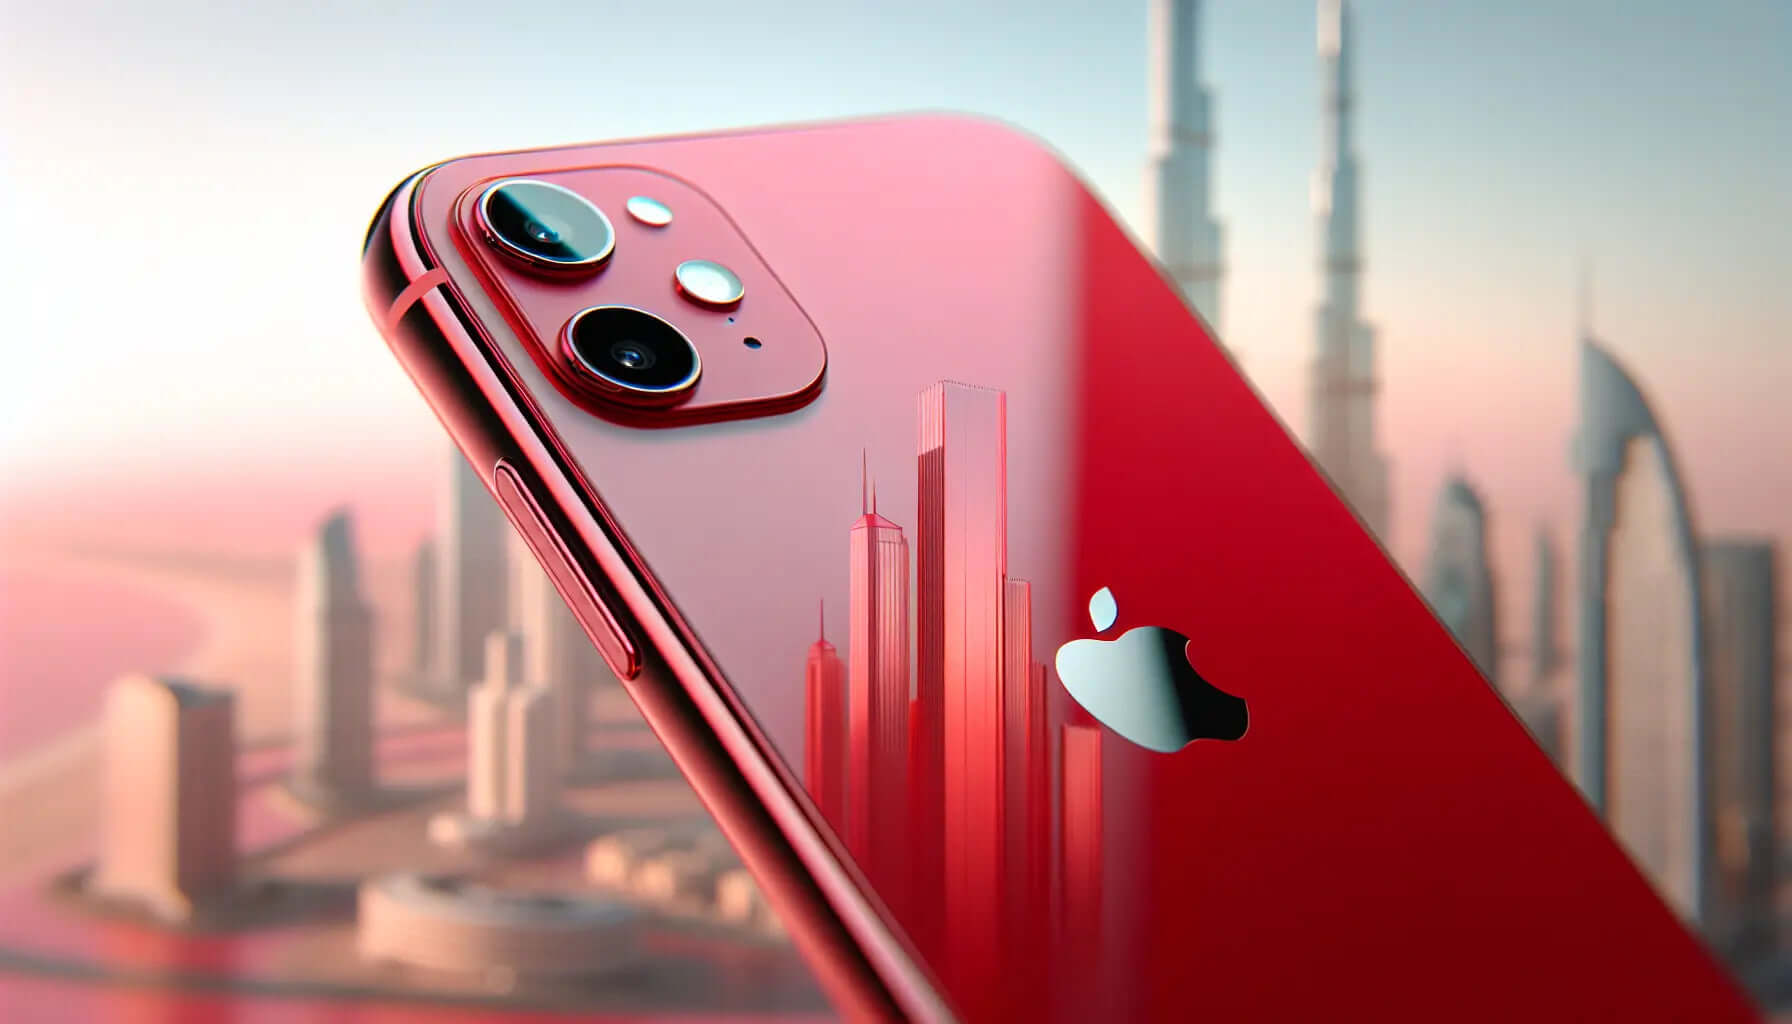 Apple iPhone 11 128GB: Full Review, Best Deals in Dubai, and Affordable Prices in UAE